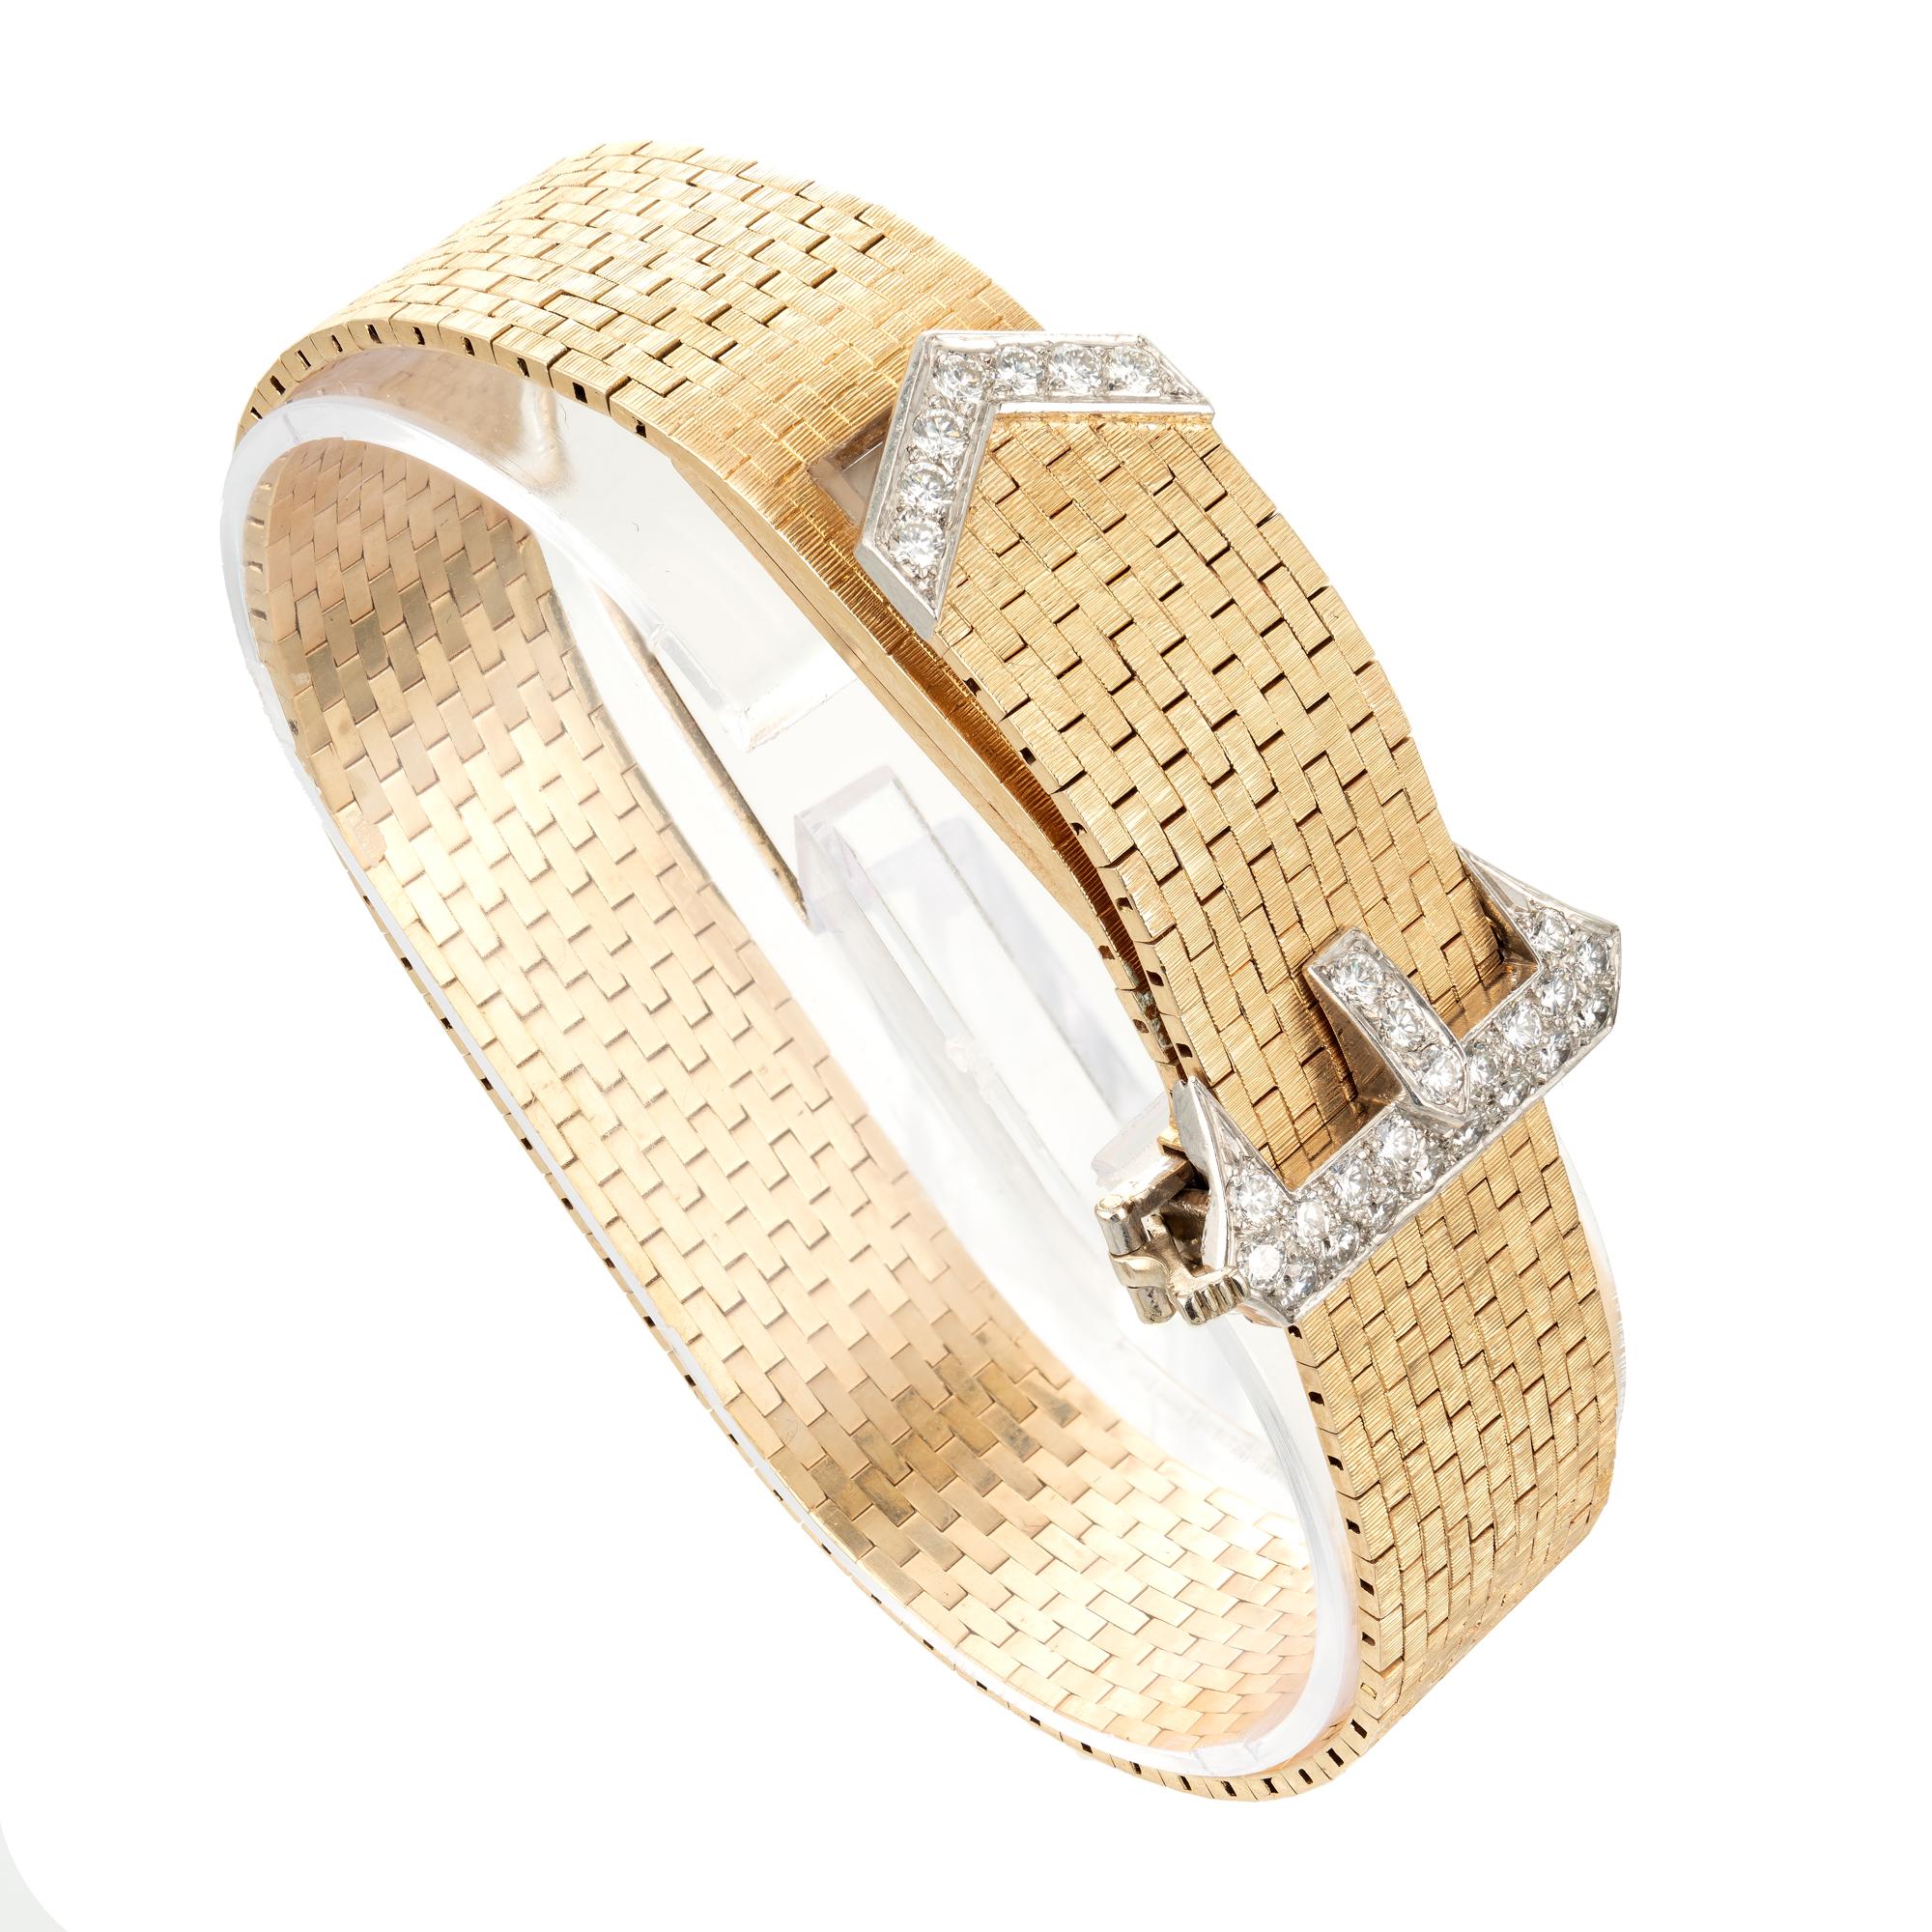 Tiffany & Co lady's 14k yellow gold and diamond buckle bracelet wristwatch, cira 1950s. 28 round full-cut diamonds.  17-jewel manual-wind Concord movement.

28 round diamonds approx. total weight .80cts total, F, VS
14k yellow gold
Length: